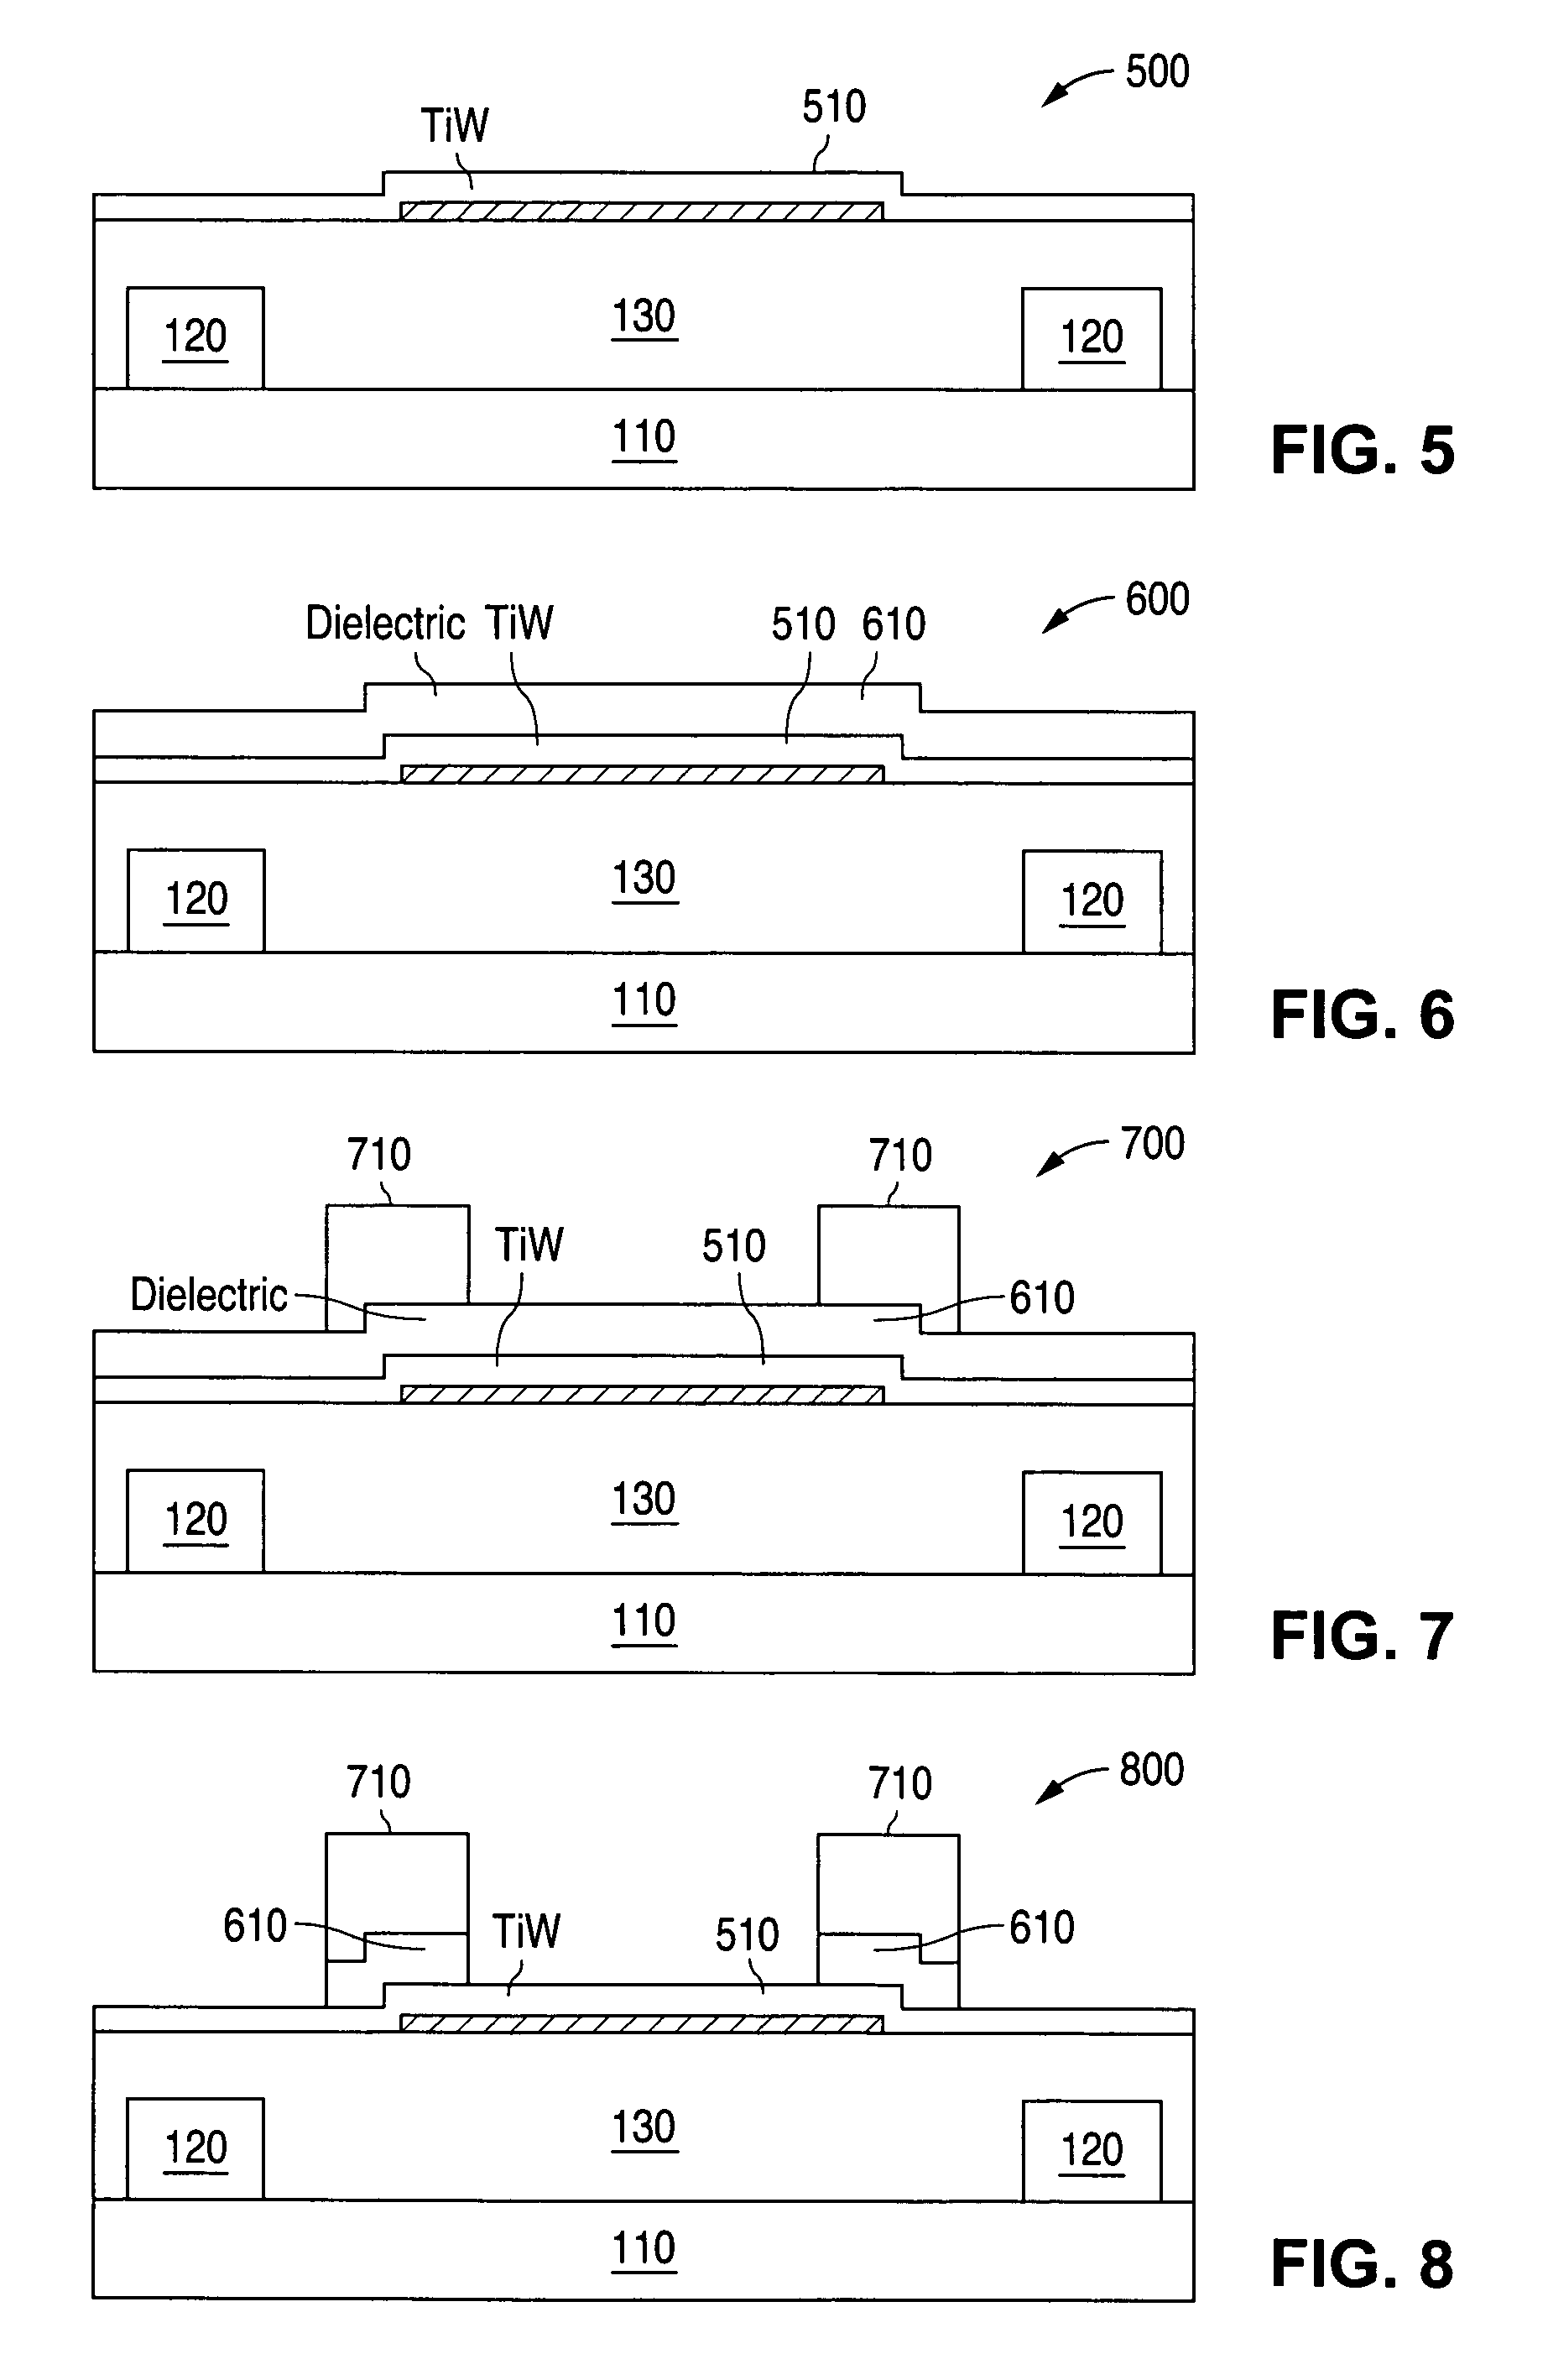 System and method for providing a dual via architecture for thin film resistors